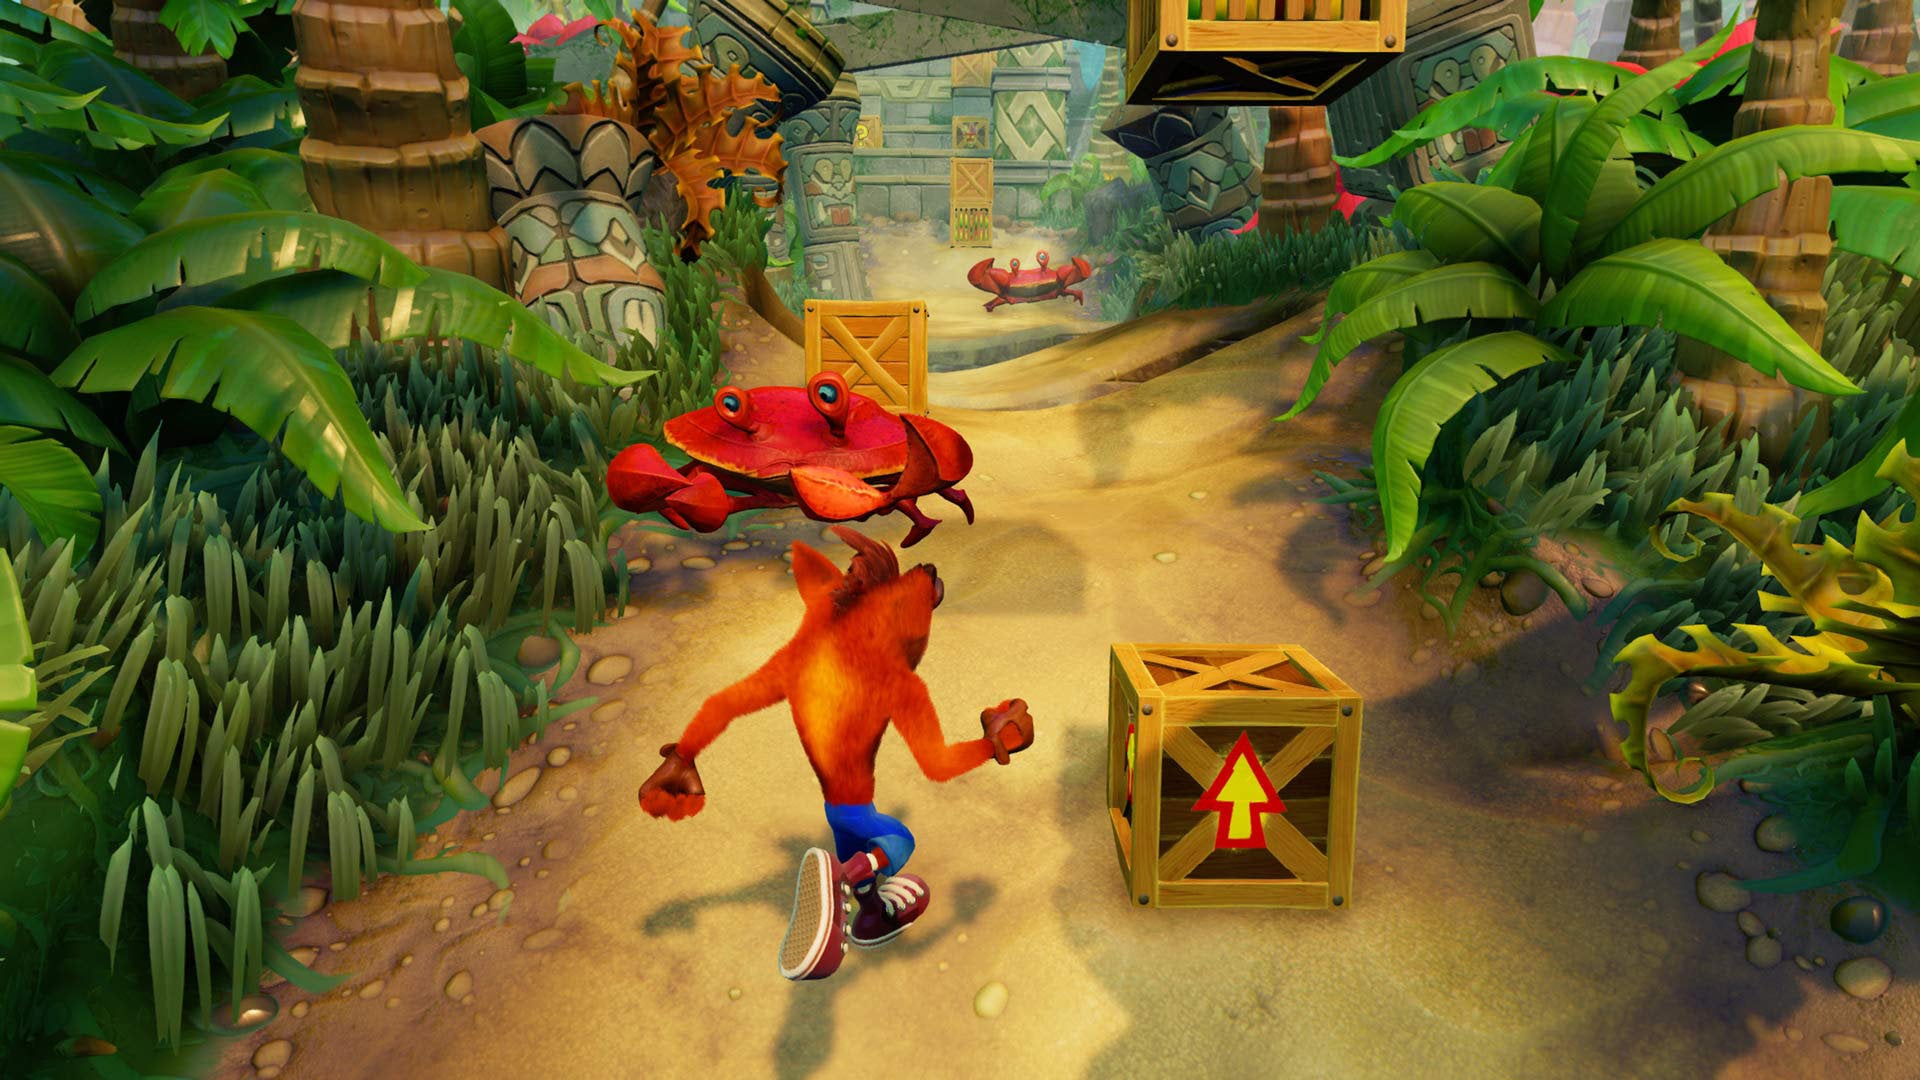 Crash Bandicoot Secret Level Guide - How to Unlock Every Secret Level in N.Sane Trilogy Xbox One, Switch, PC - Find all the Keys, Face Pick-ups | VG247